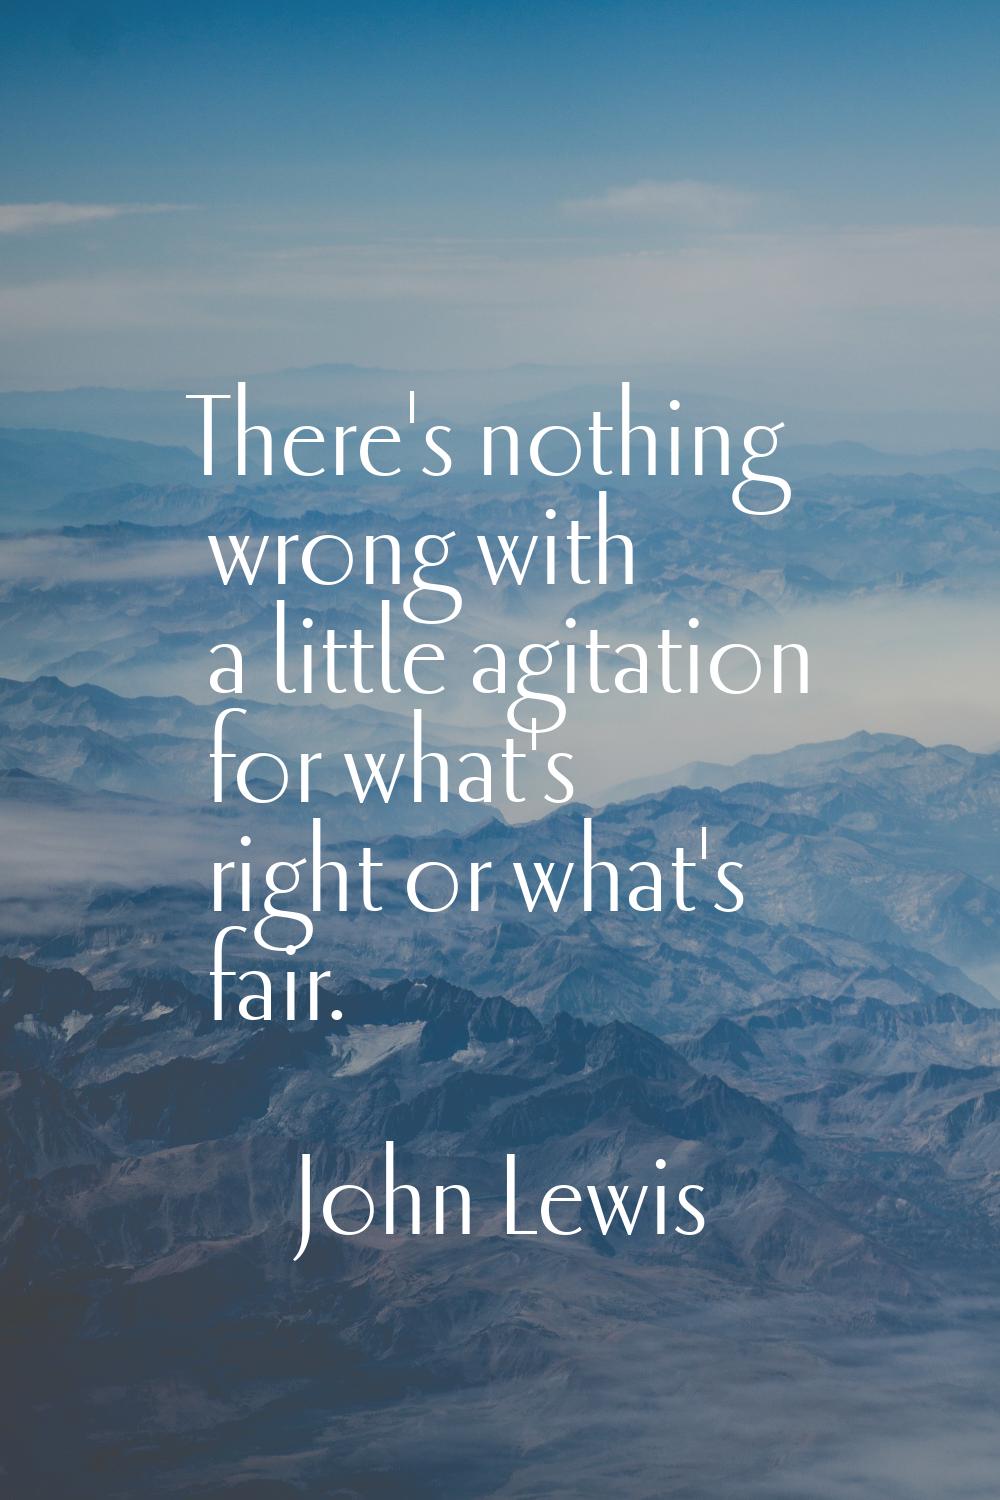 There's nothing wrong with a little agitation for what's right or what's fair.